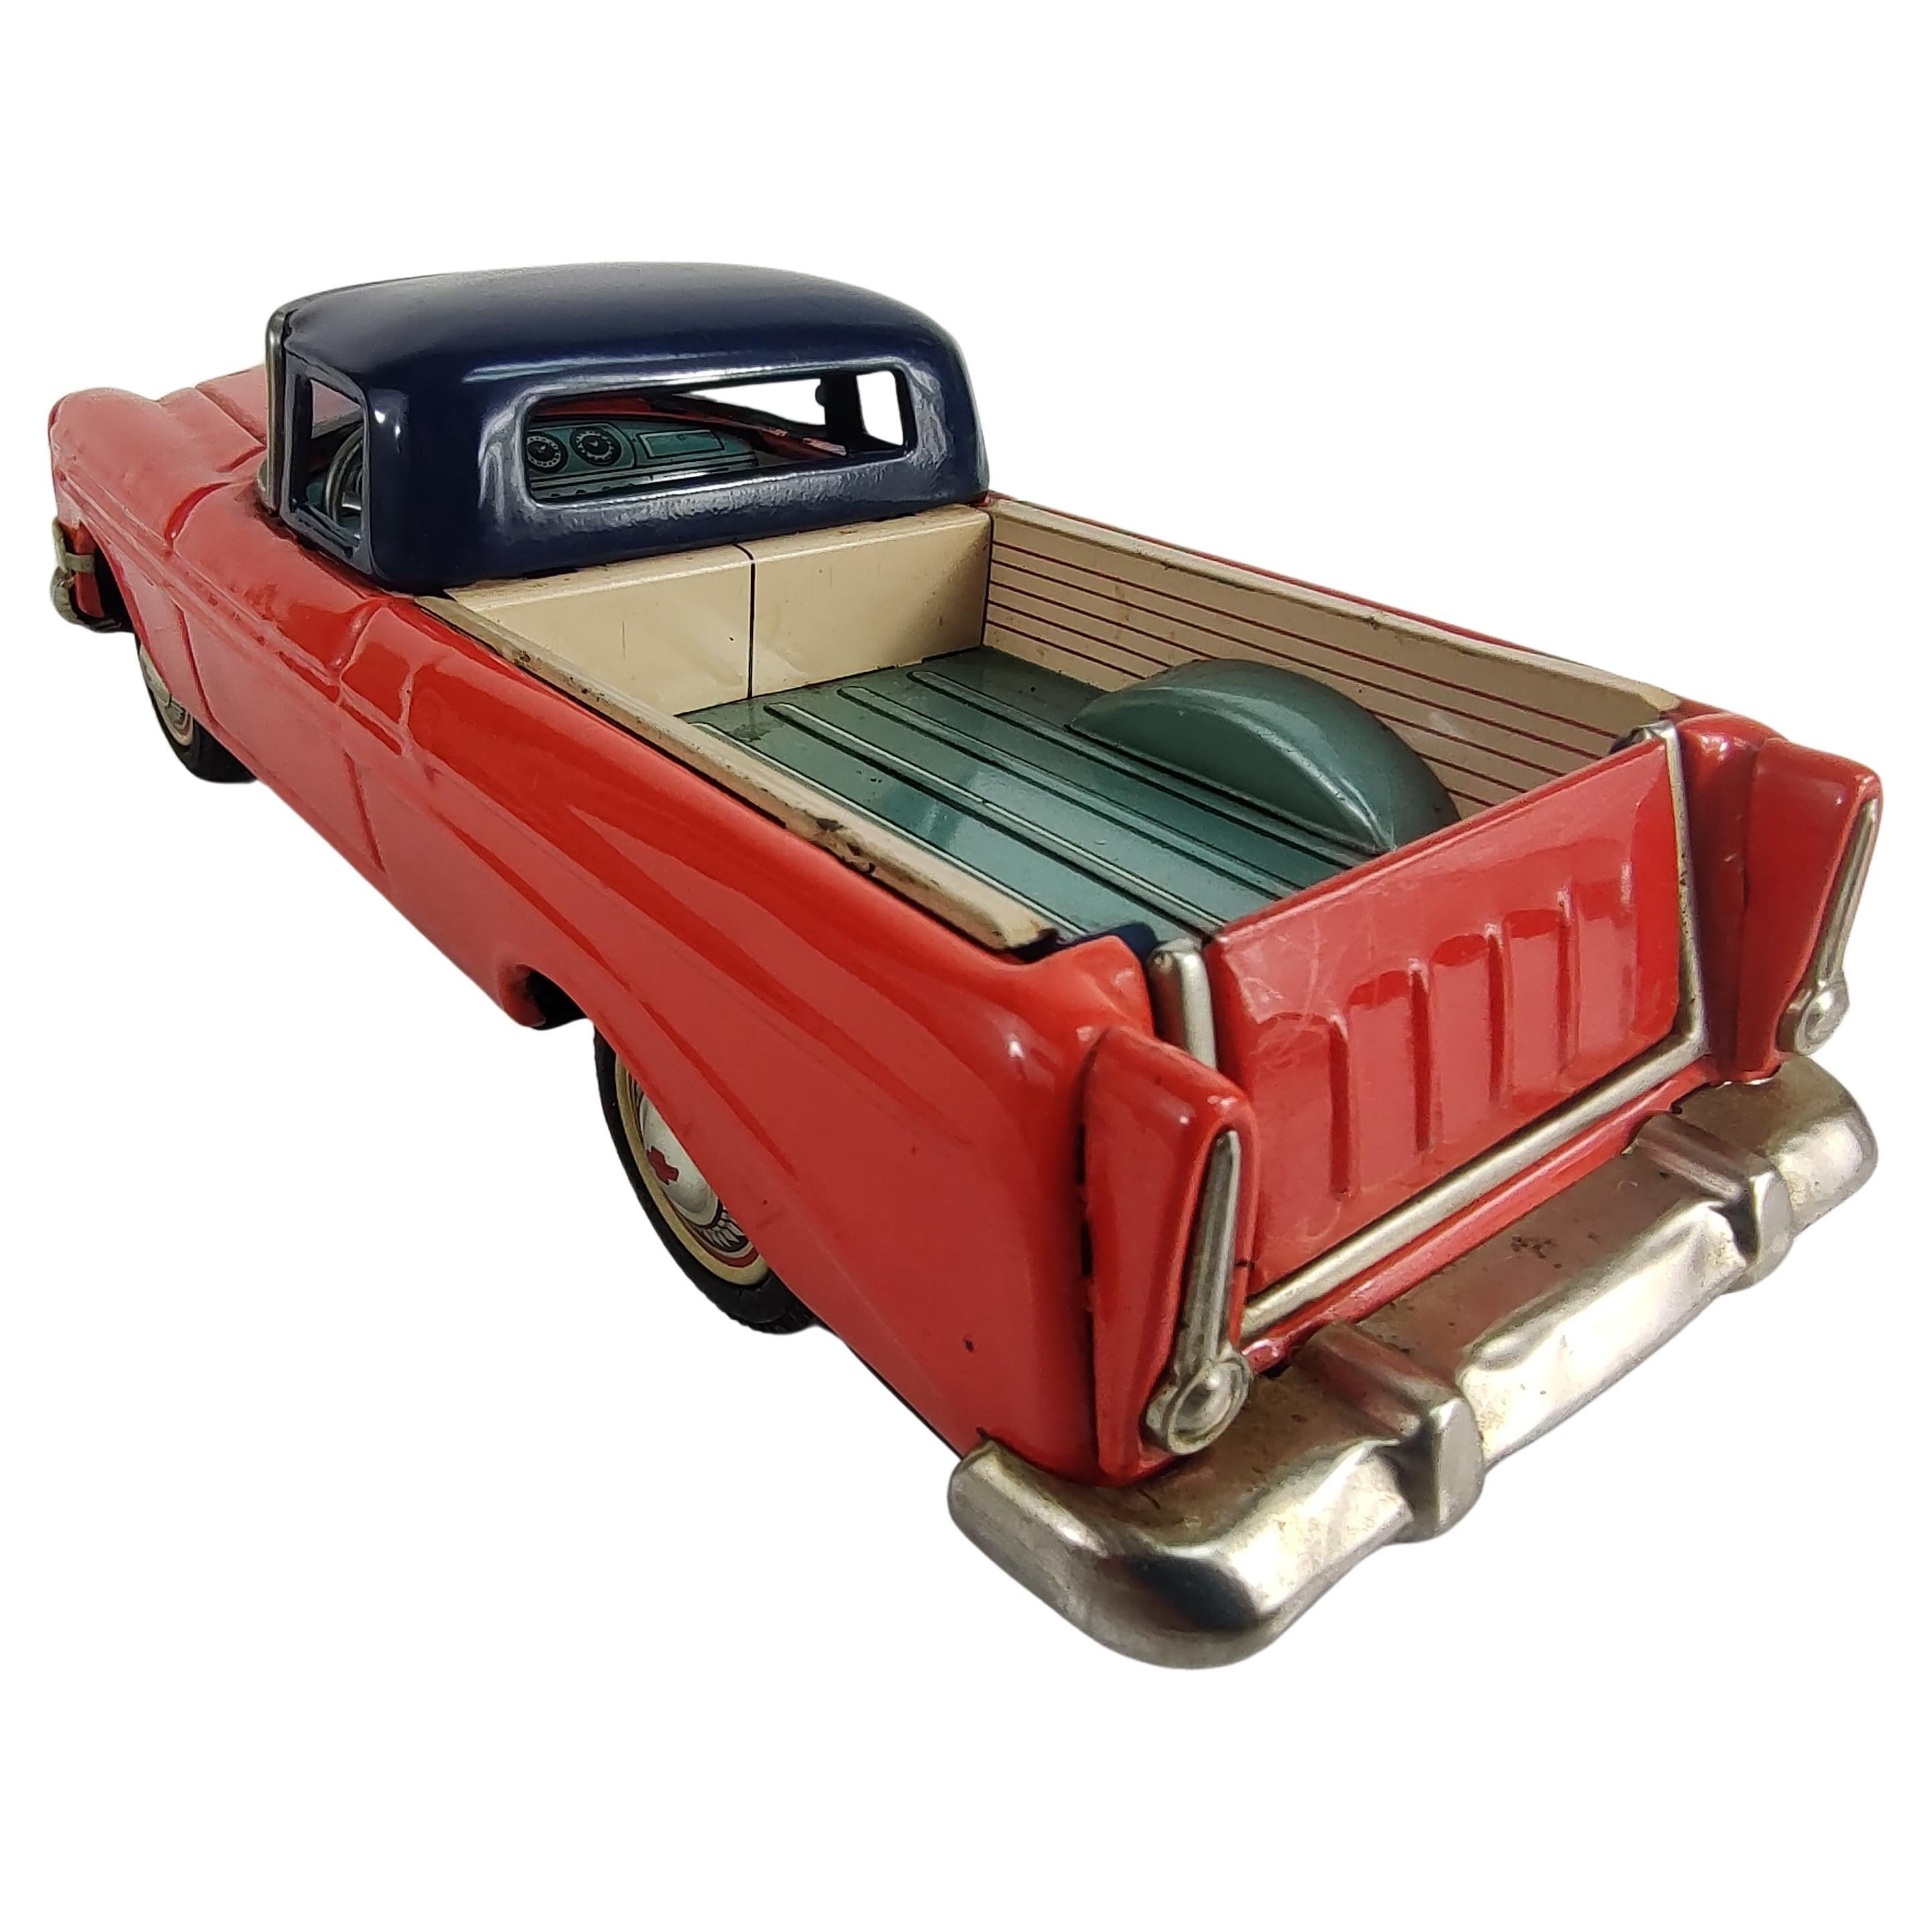 Industrial Mid Century Japanese Tin Litho Friction Toy Car Chevrolet El Camino C1956 For Sale